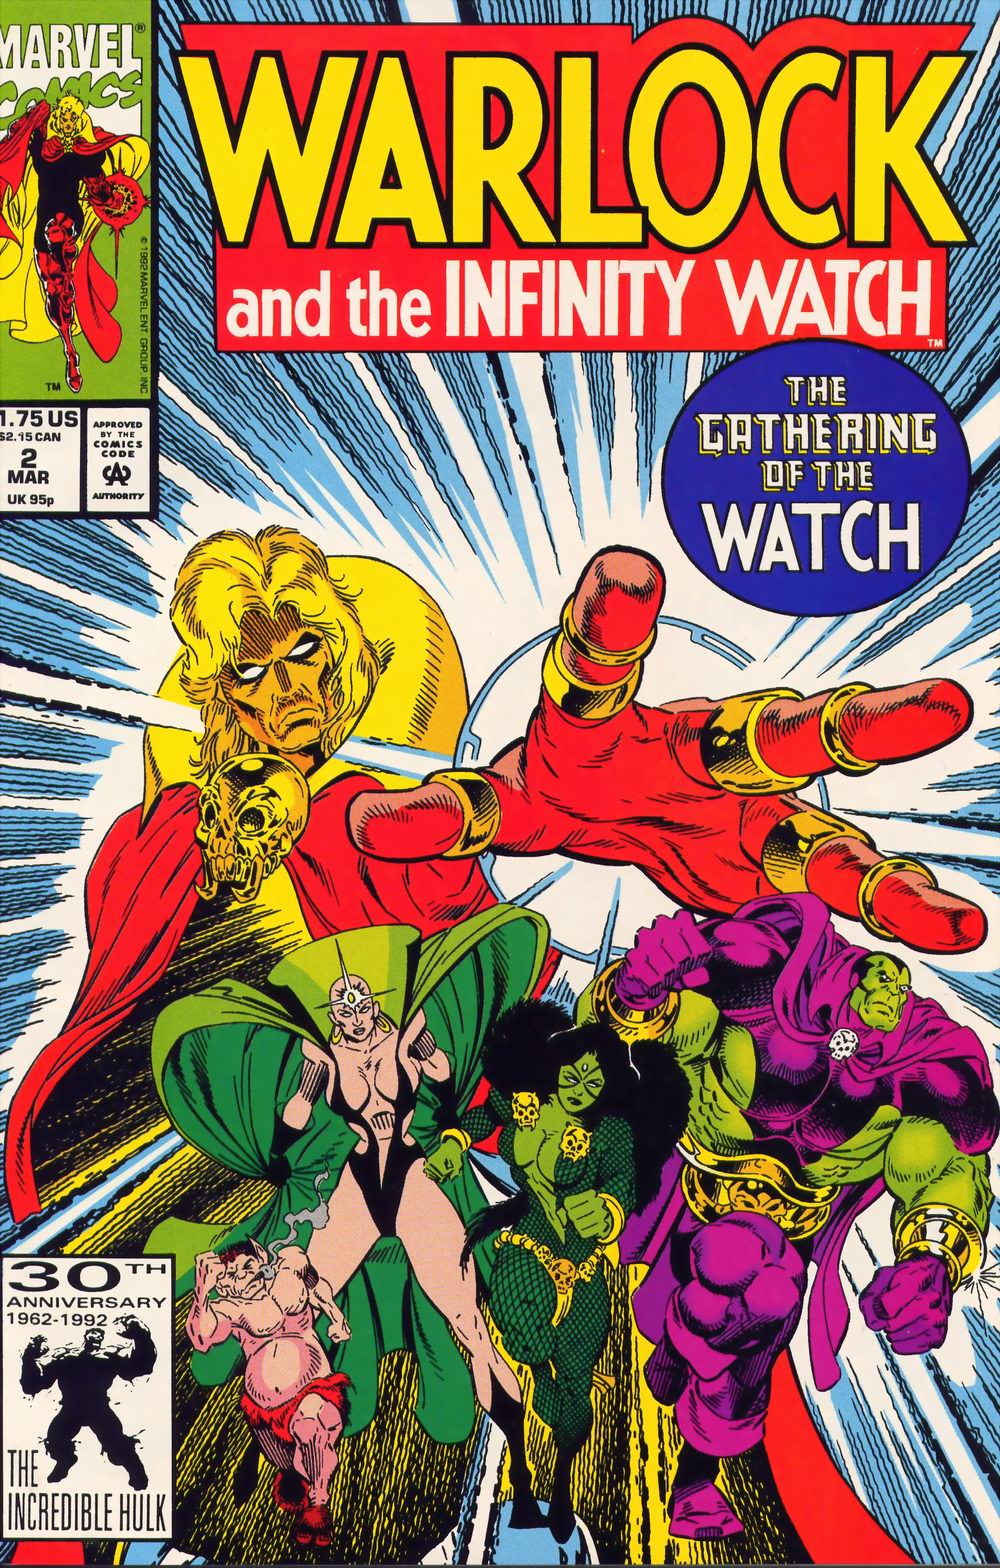 Warlock and the Infinity Watch Vol. 1 #2